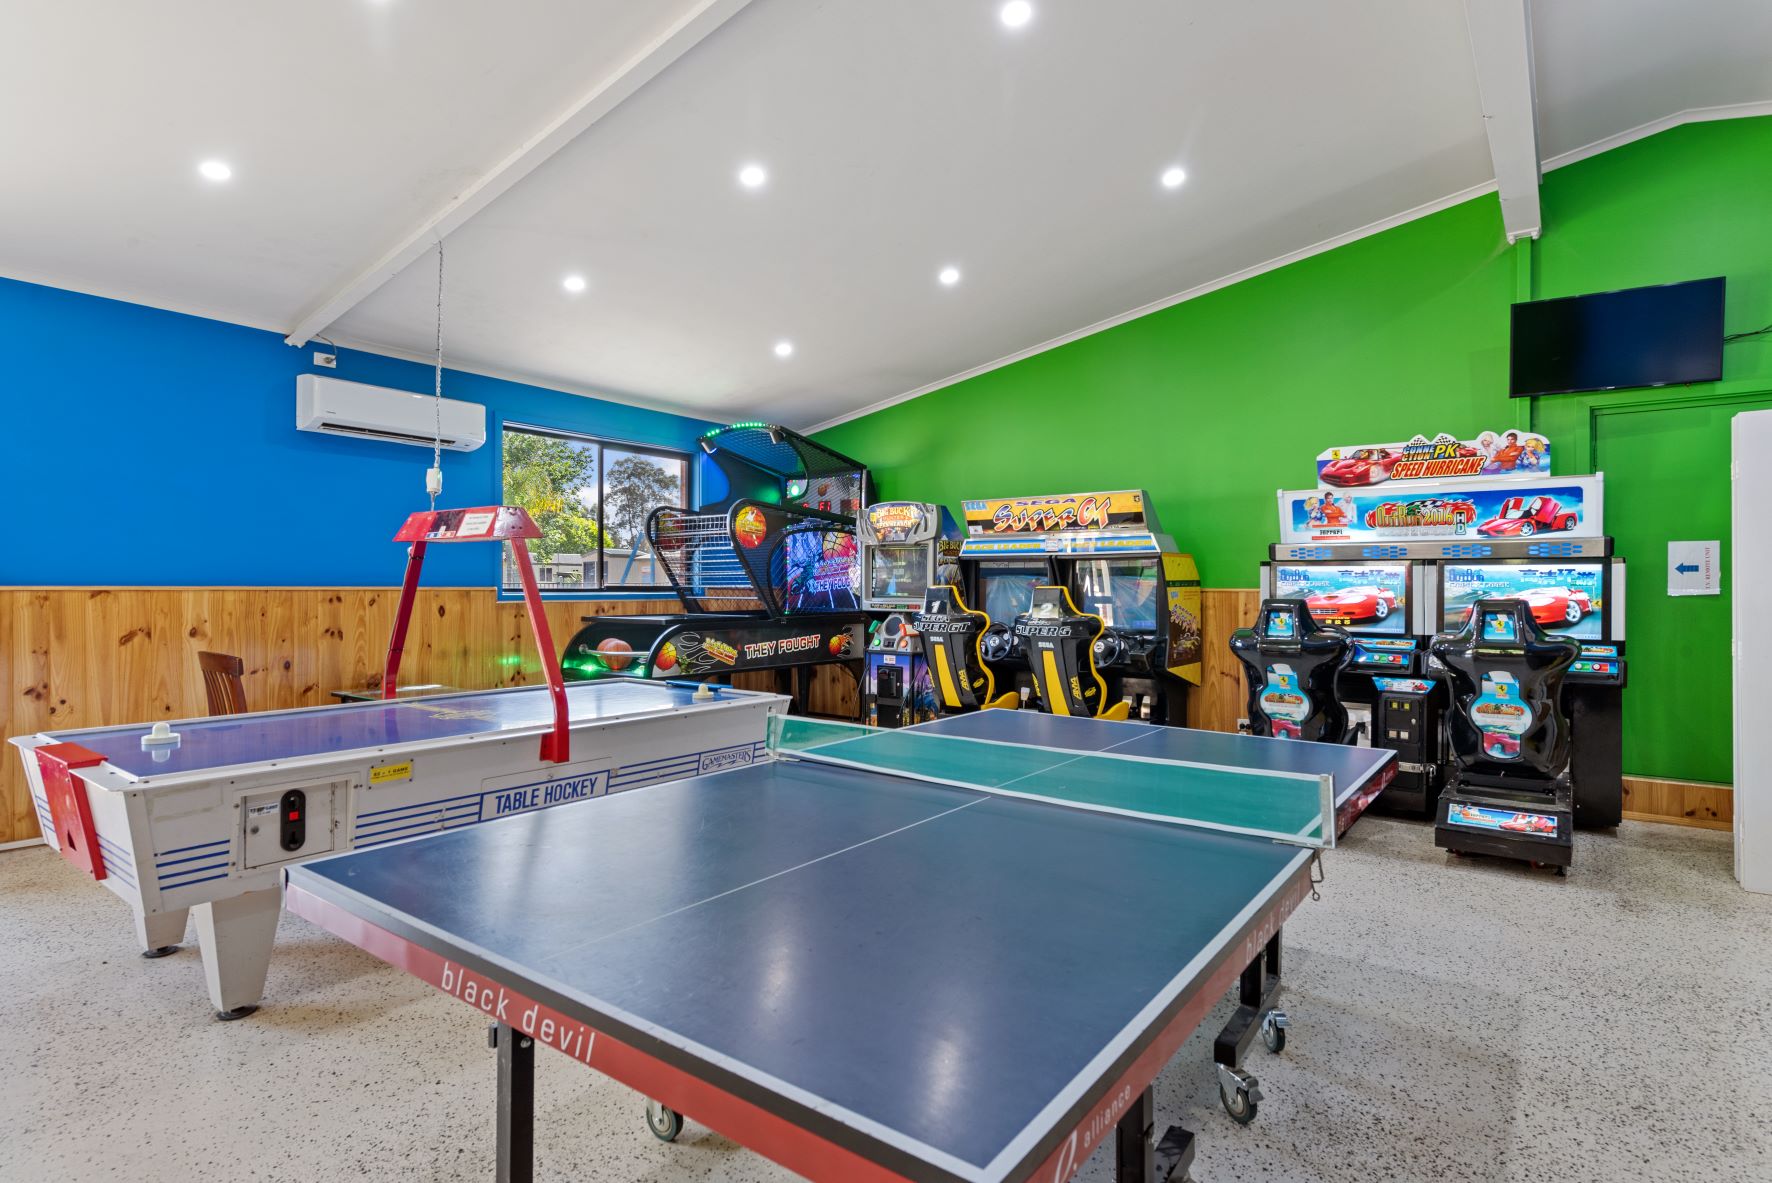 The best holiday parks in australia games rooms table tennis arcade